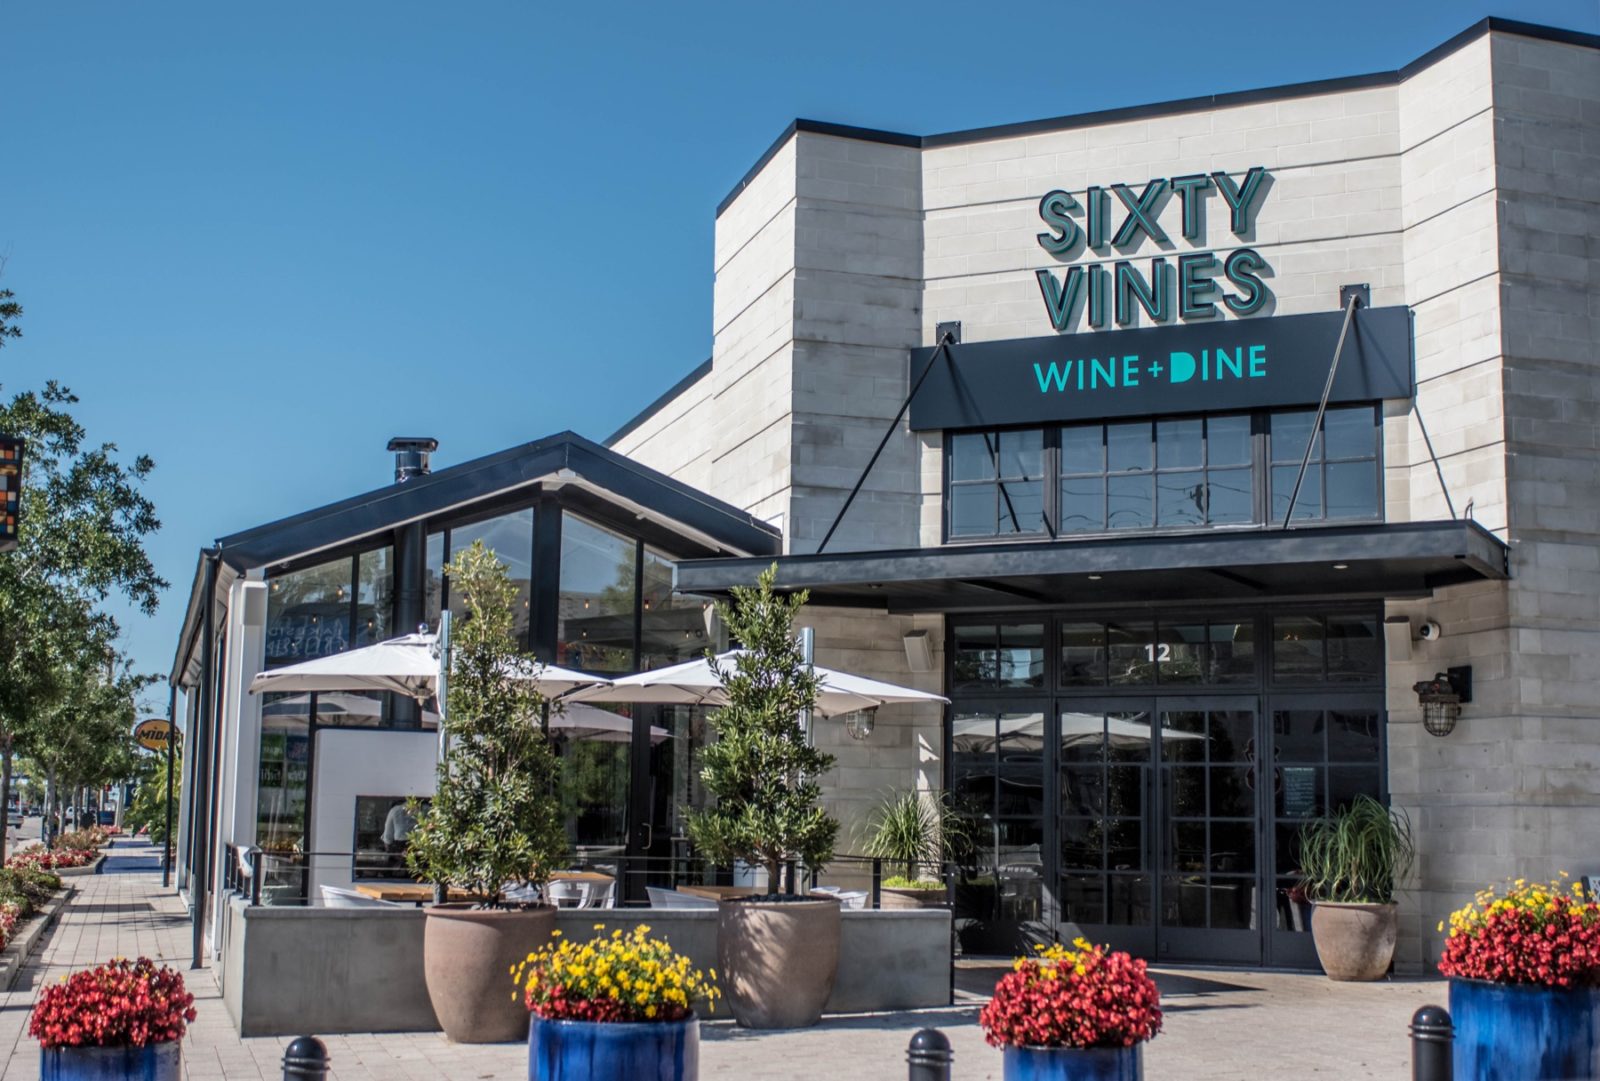 NSixty Vines, located on Orlando Ave. In Winter Park, Florida